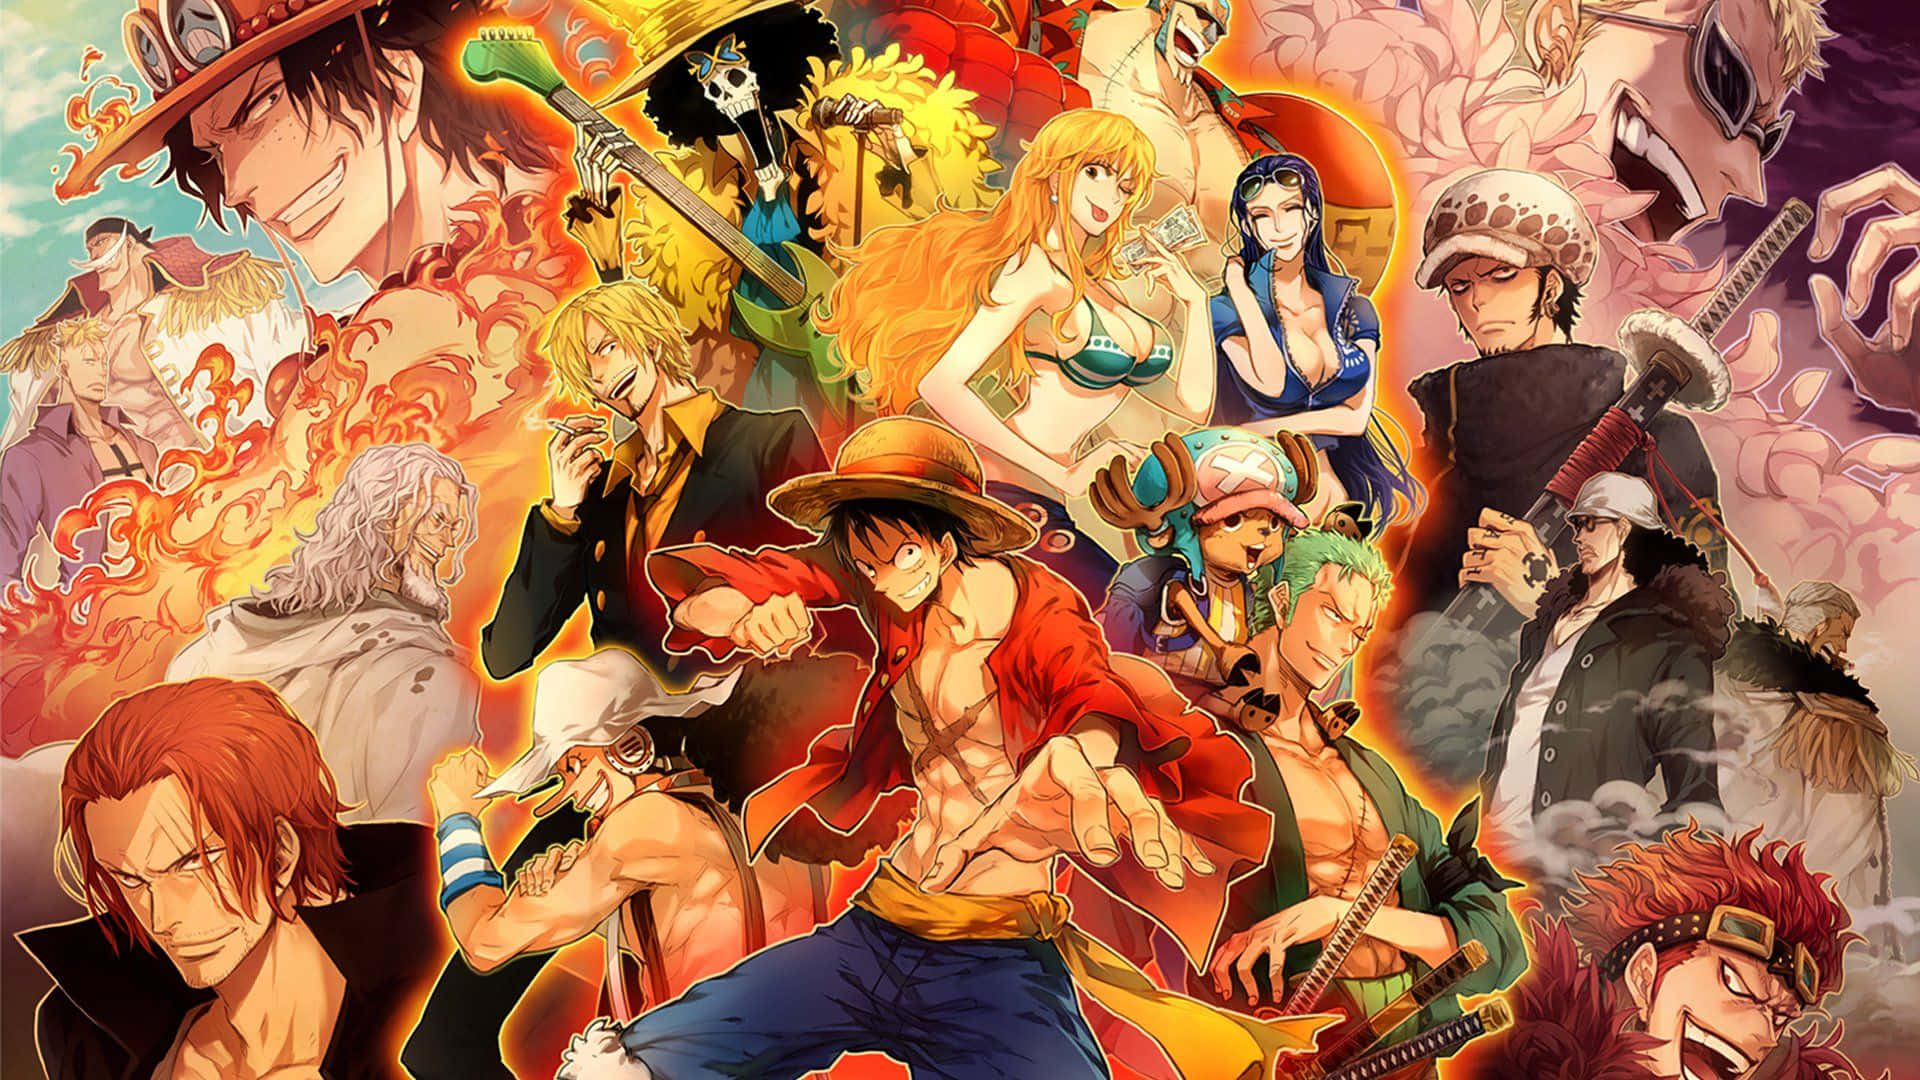 The epic crew of One Piece sailing ahead for adventure Wallpaper